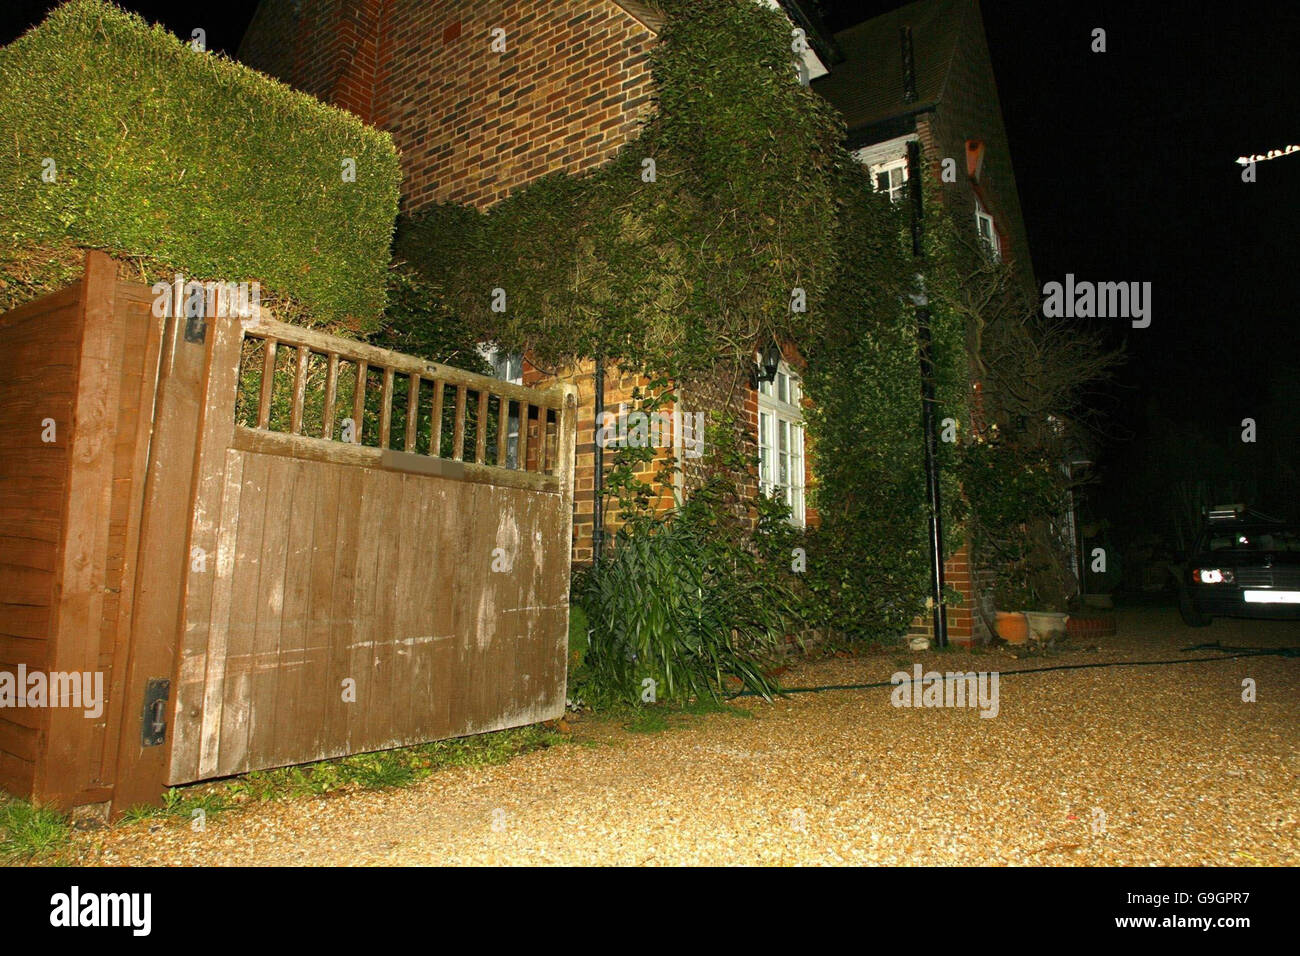 The house Middleton on Sea, West Sussex, where a 14-month-old boy who mauled by a Rottweiler. Stock Photo